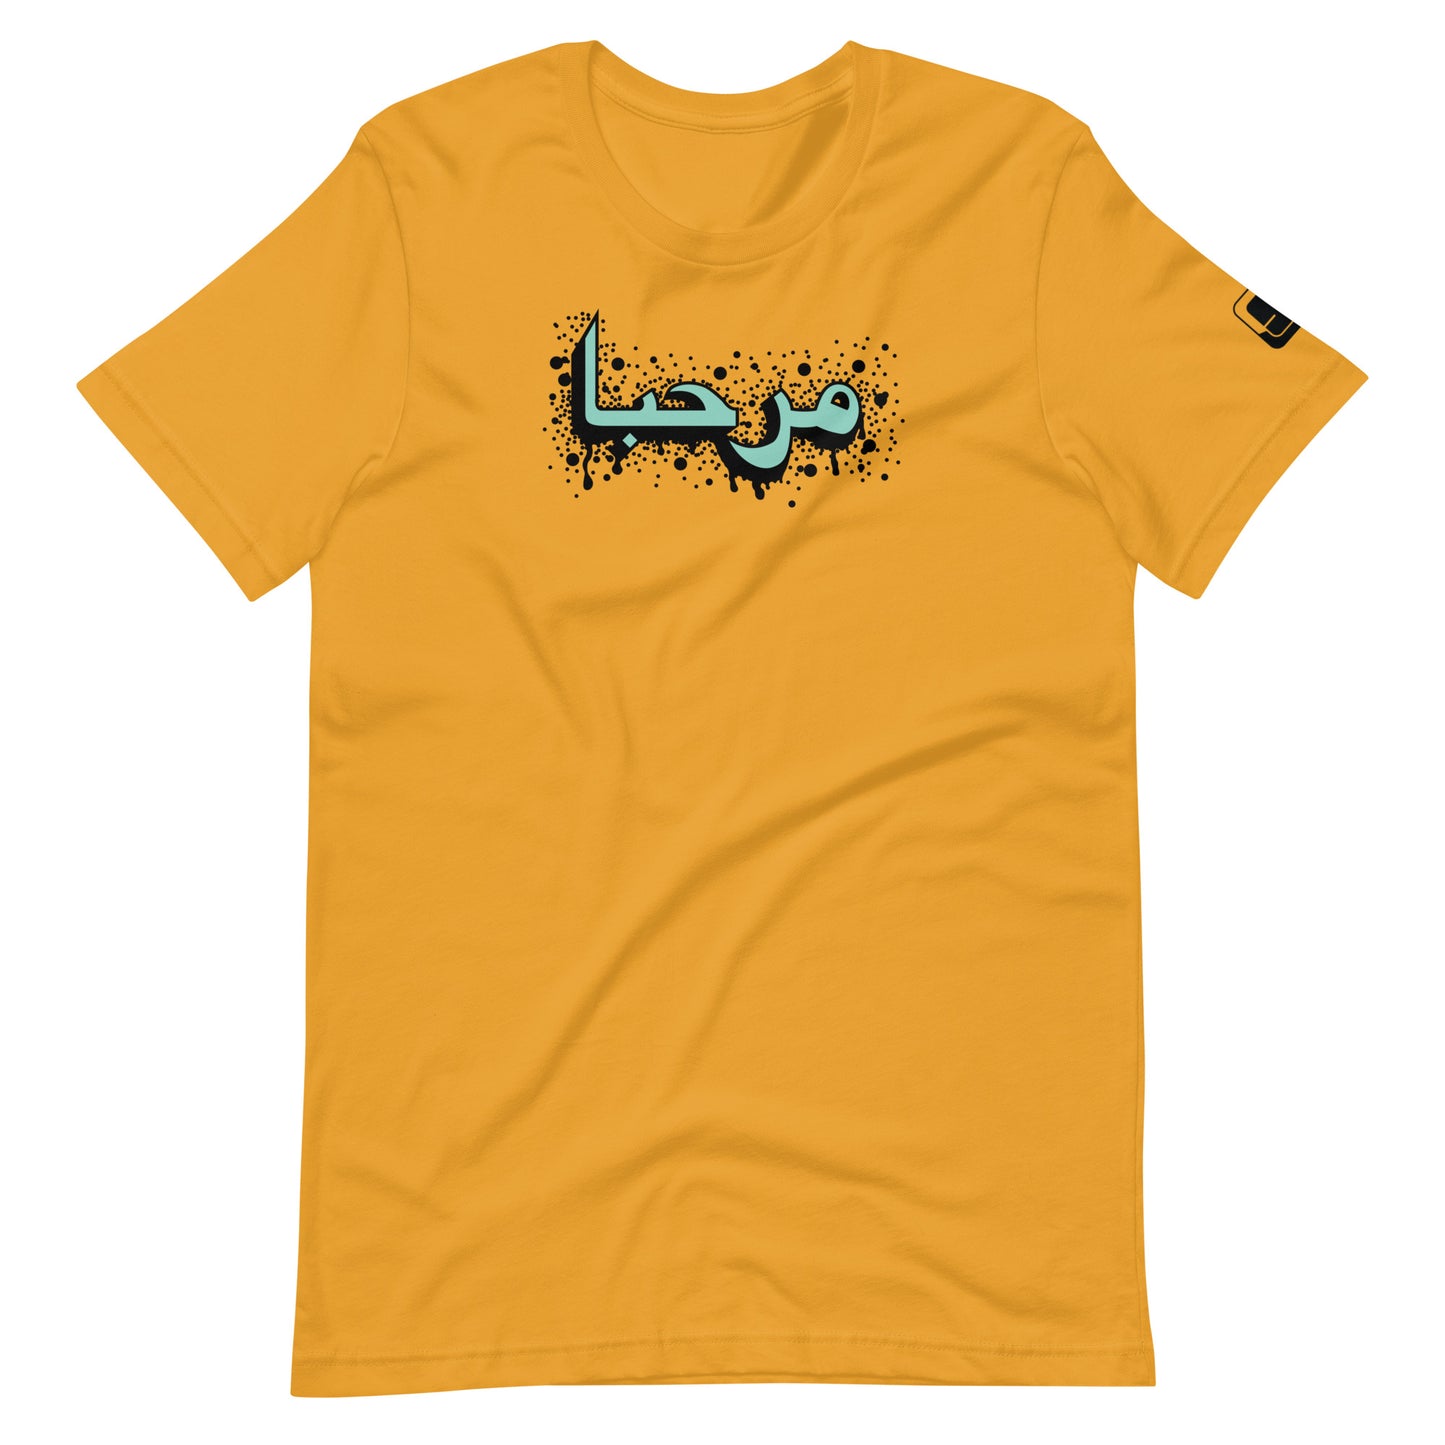 Mustard yellow t-shirt featuring central turquoise Arabic calligraphy with black shadow and scattered ink dots, accompanied by a small black logo patch on the sleeve, displayed against a white background.